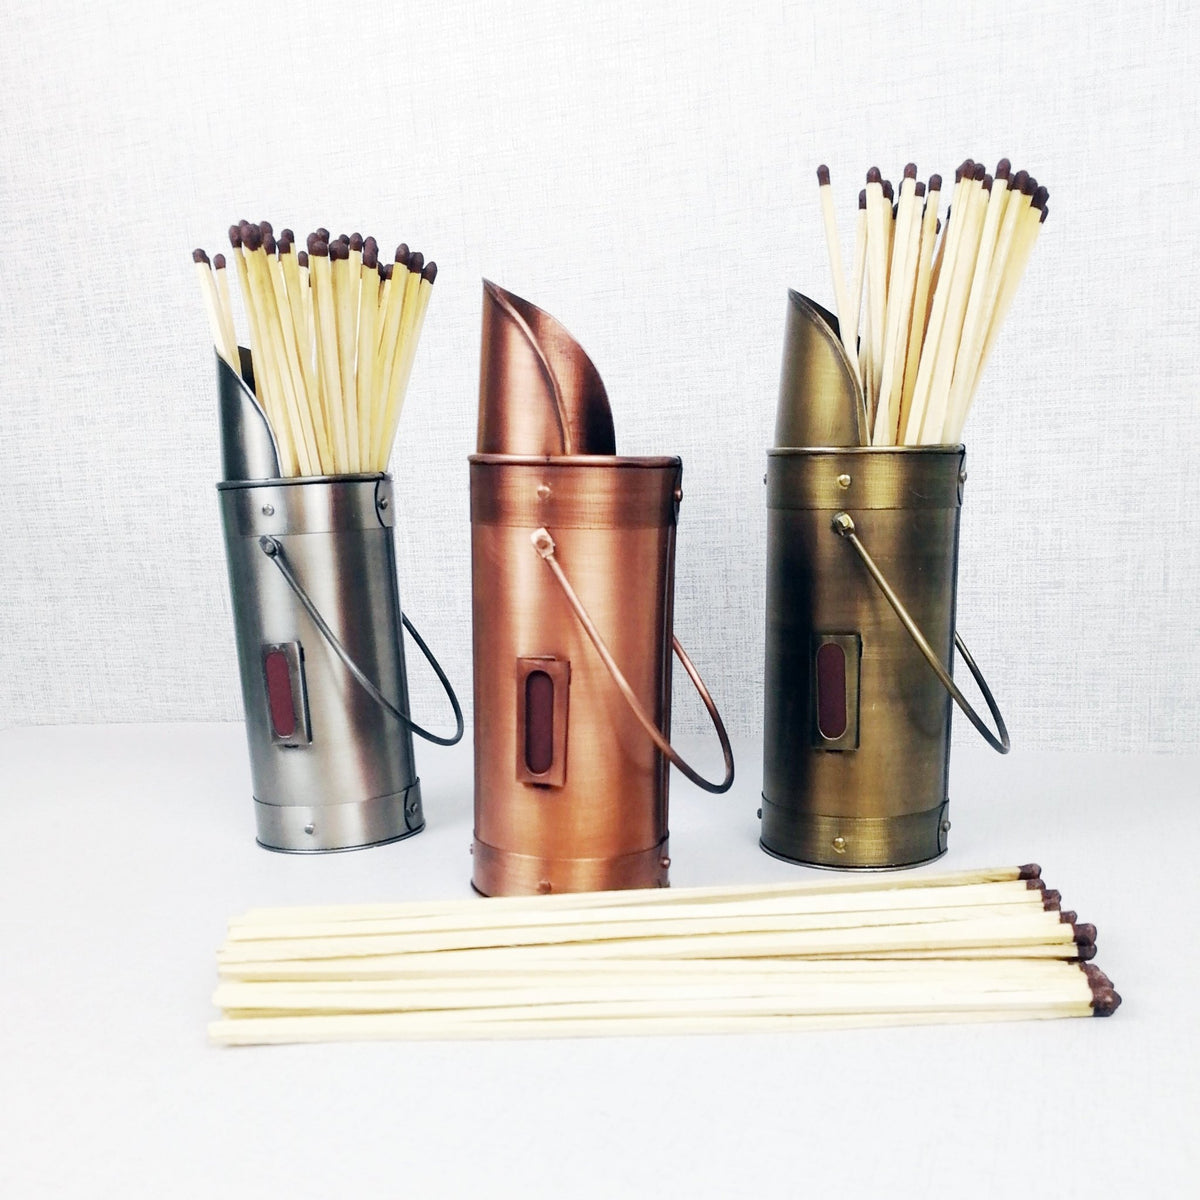 Matchstick holders bronze pewter copper with matches against grey background